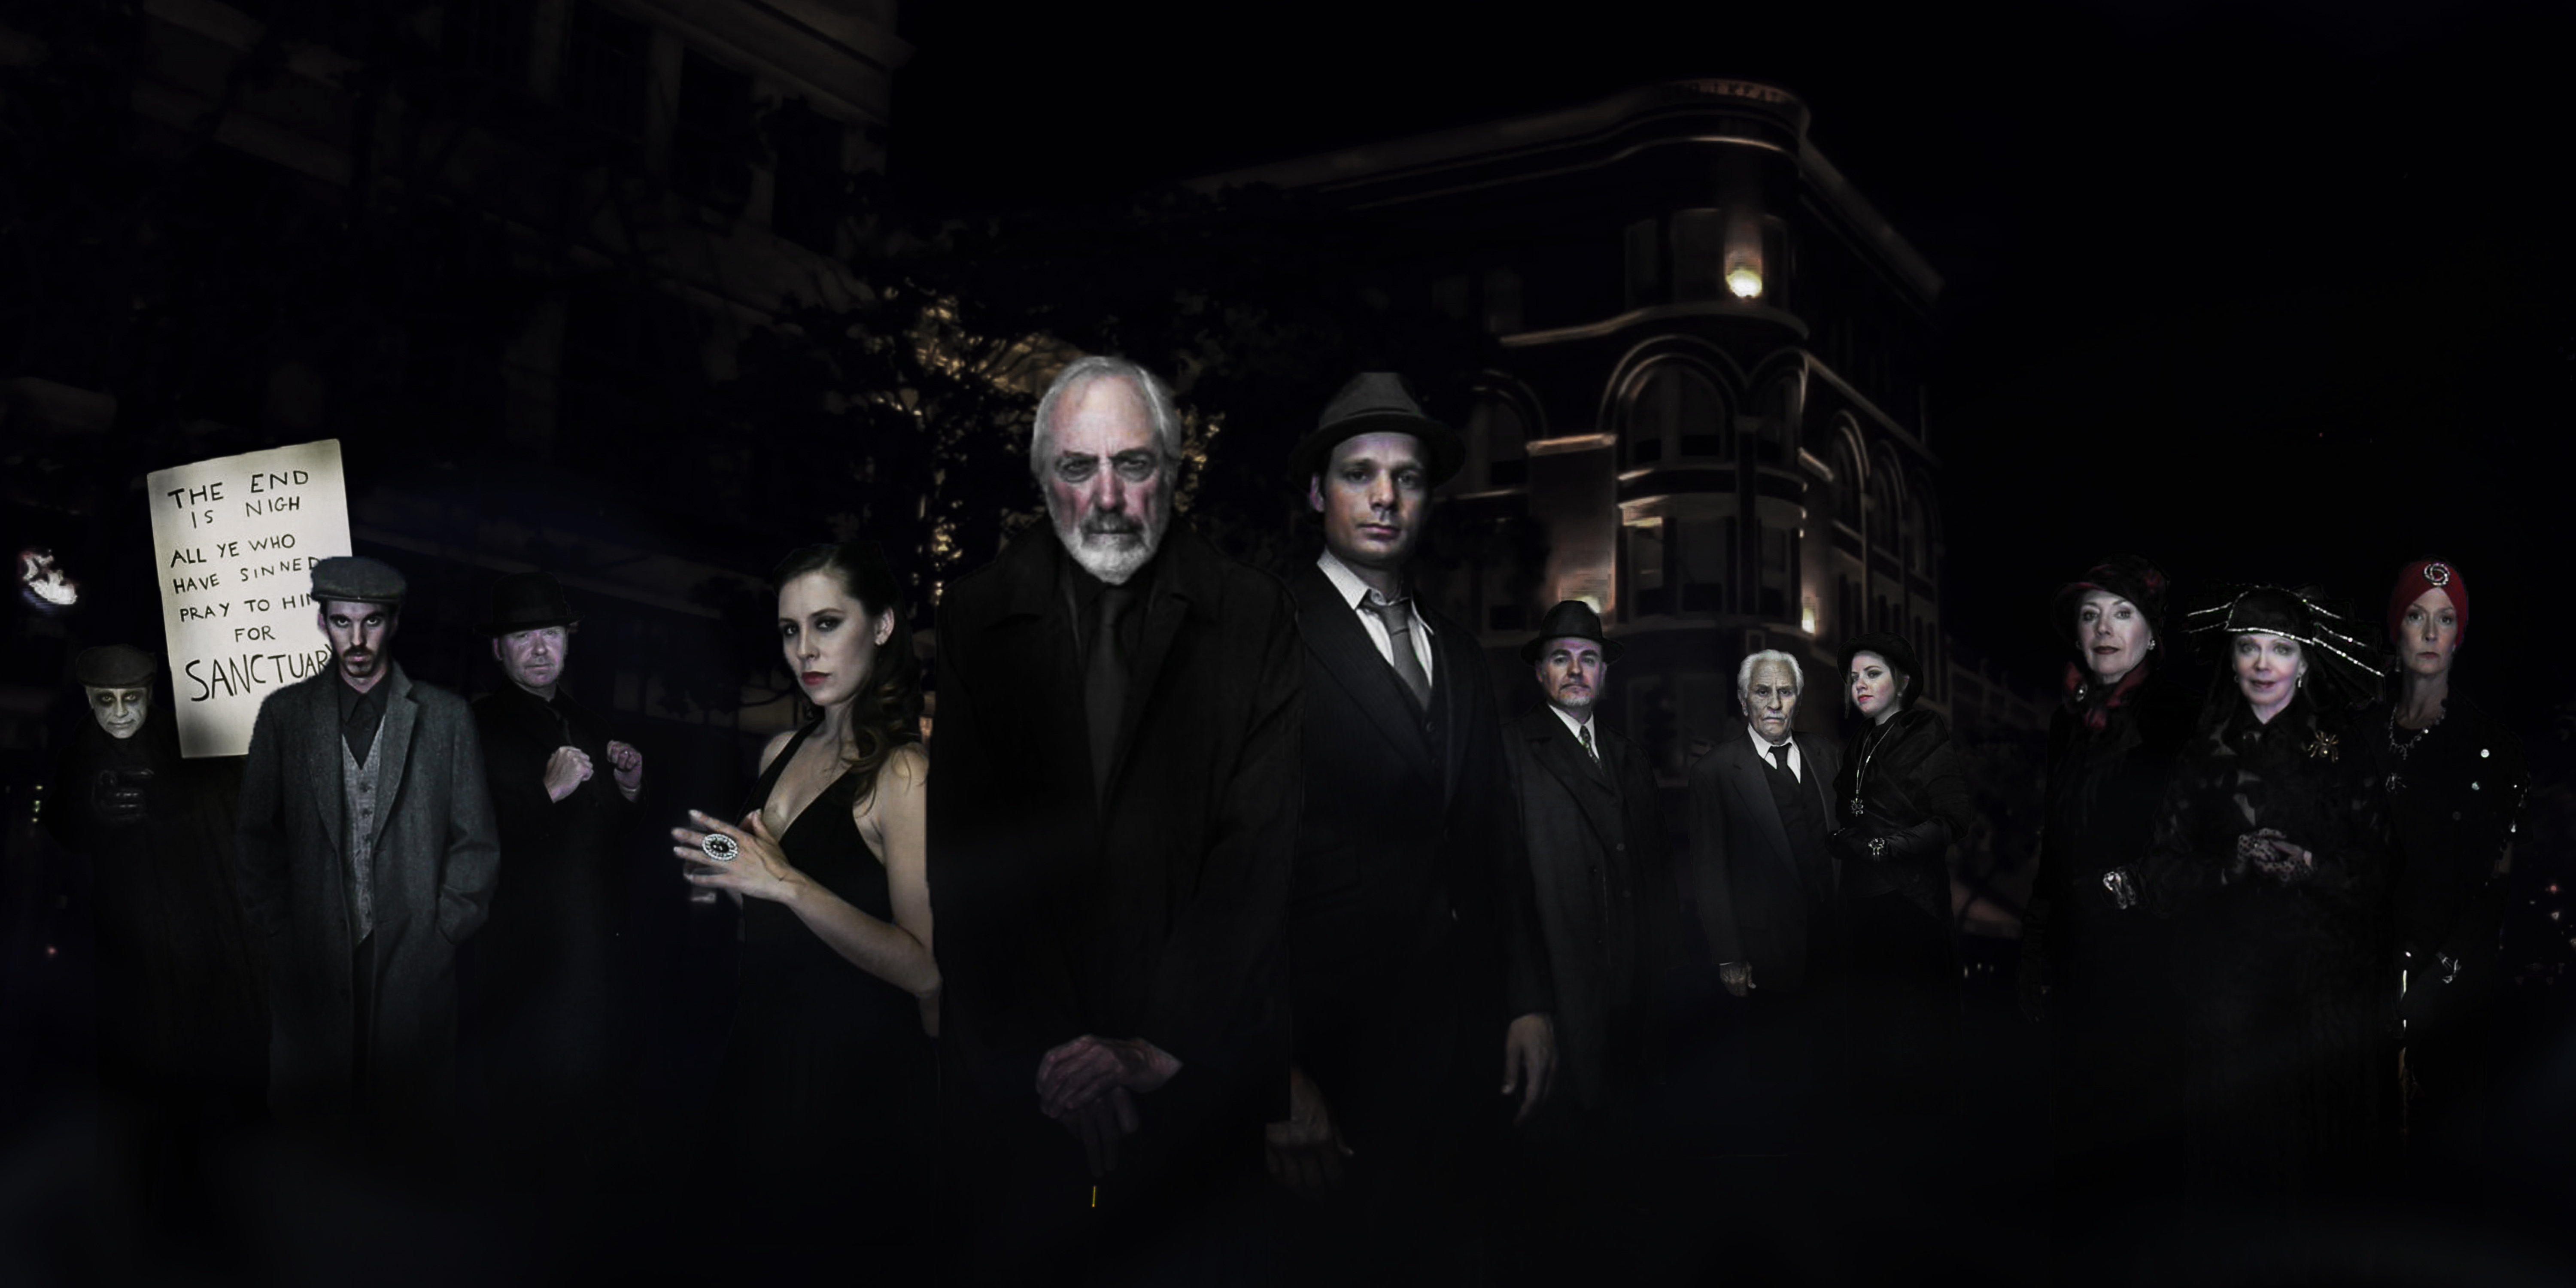 Official Cast Photo From L to R: John C Smith as the Apocalypse Man, Derek Mobraaten as Tom Smith, Julian Grant as Edward Hull, Bahia Garrigan as Christina Novello, Jerry Lacy as Dr. Mabuse, Nathan Wilson as Inspector Carl Lohemann, David Graham as City General Oscar Lang, Linden Chiles as Inspector Norbert Von Wenk, Vivian Brasch as Lady Levana, Kathryn Leigh Scott as Madame Von Harbau, Lara Parker as Madame Carrozza, and Annie Waterman as Madame Hecate